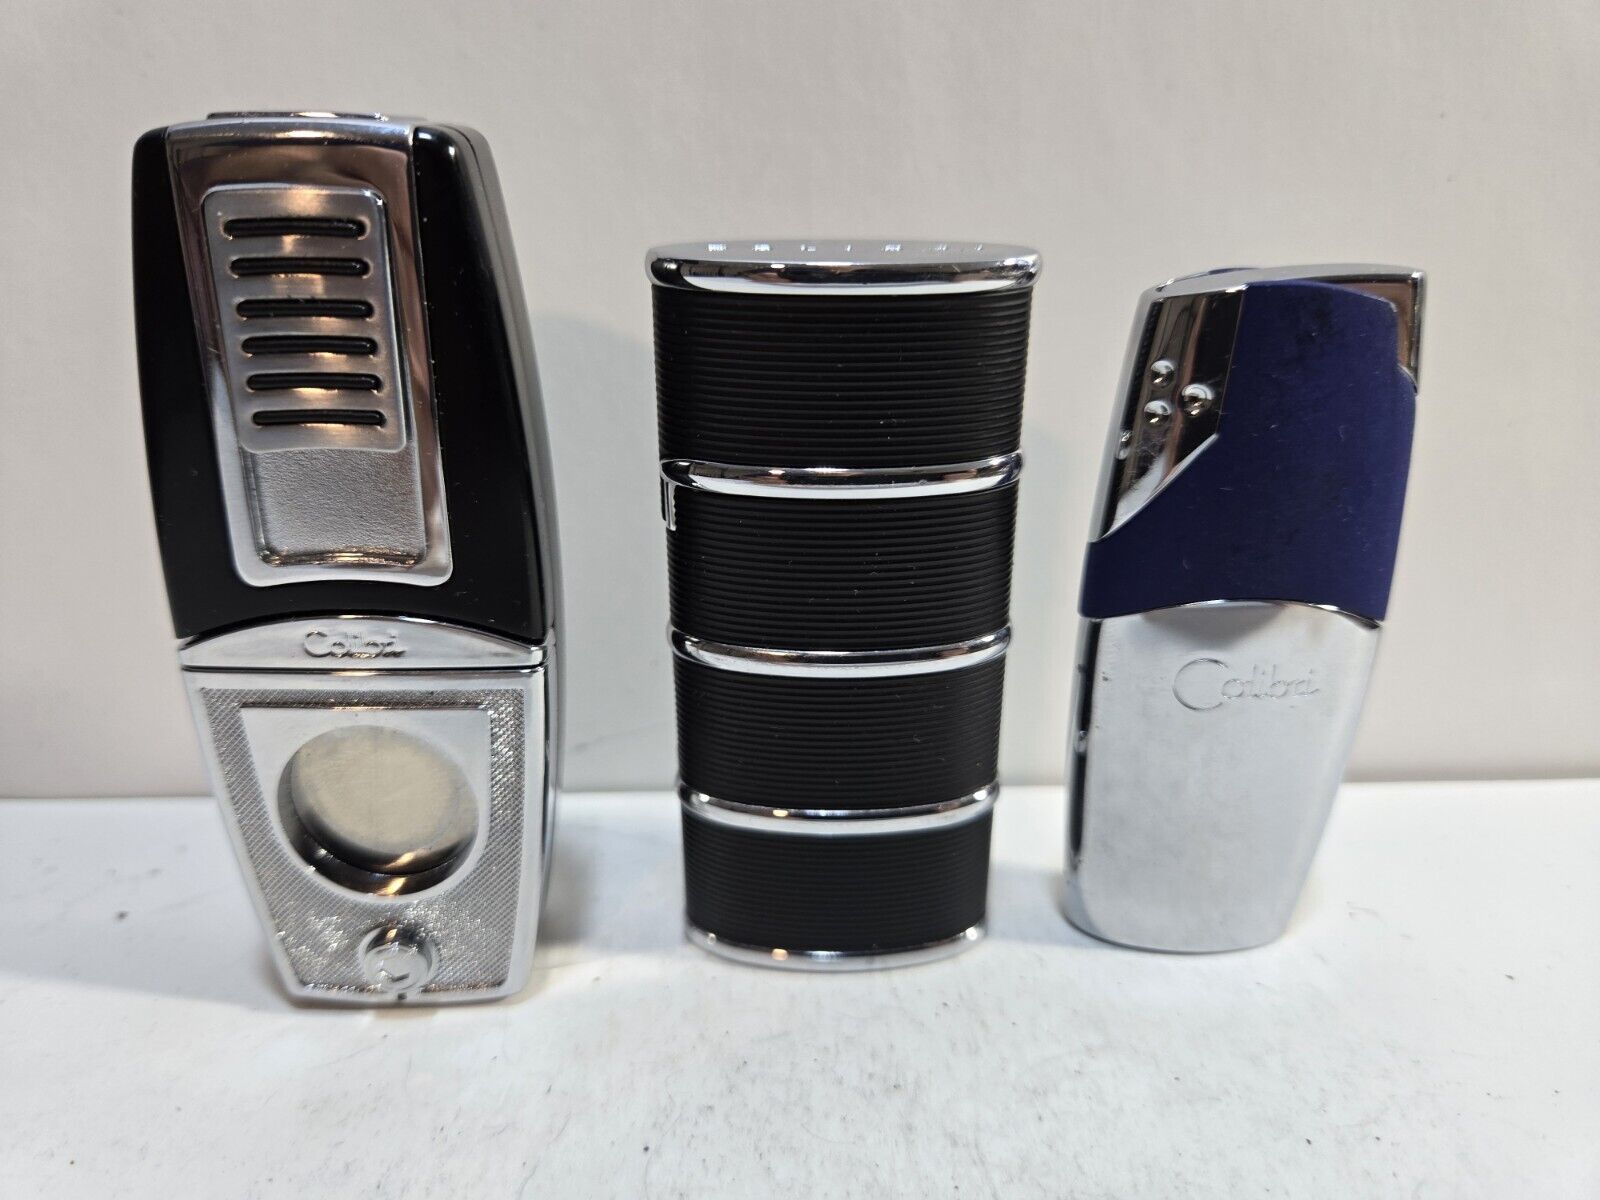 LOT OF 3  VINTAGE COLIBRI LIGHTERS     collect   / display   7010/8